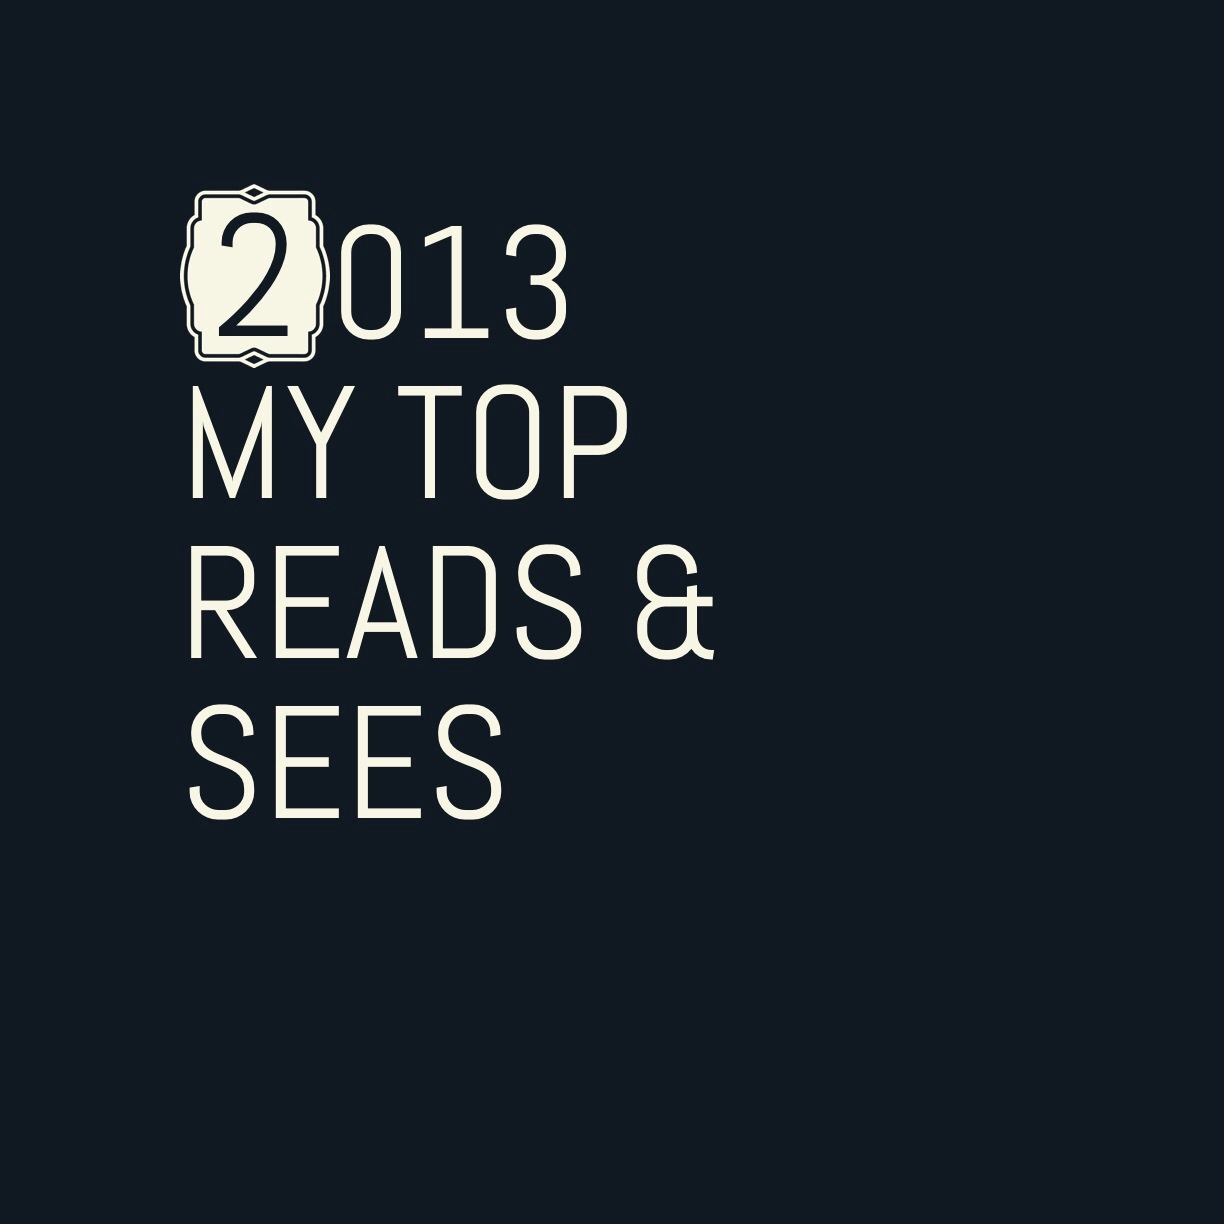 My Top Reads & Sees of 2013